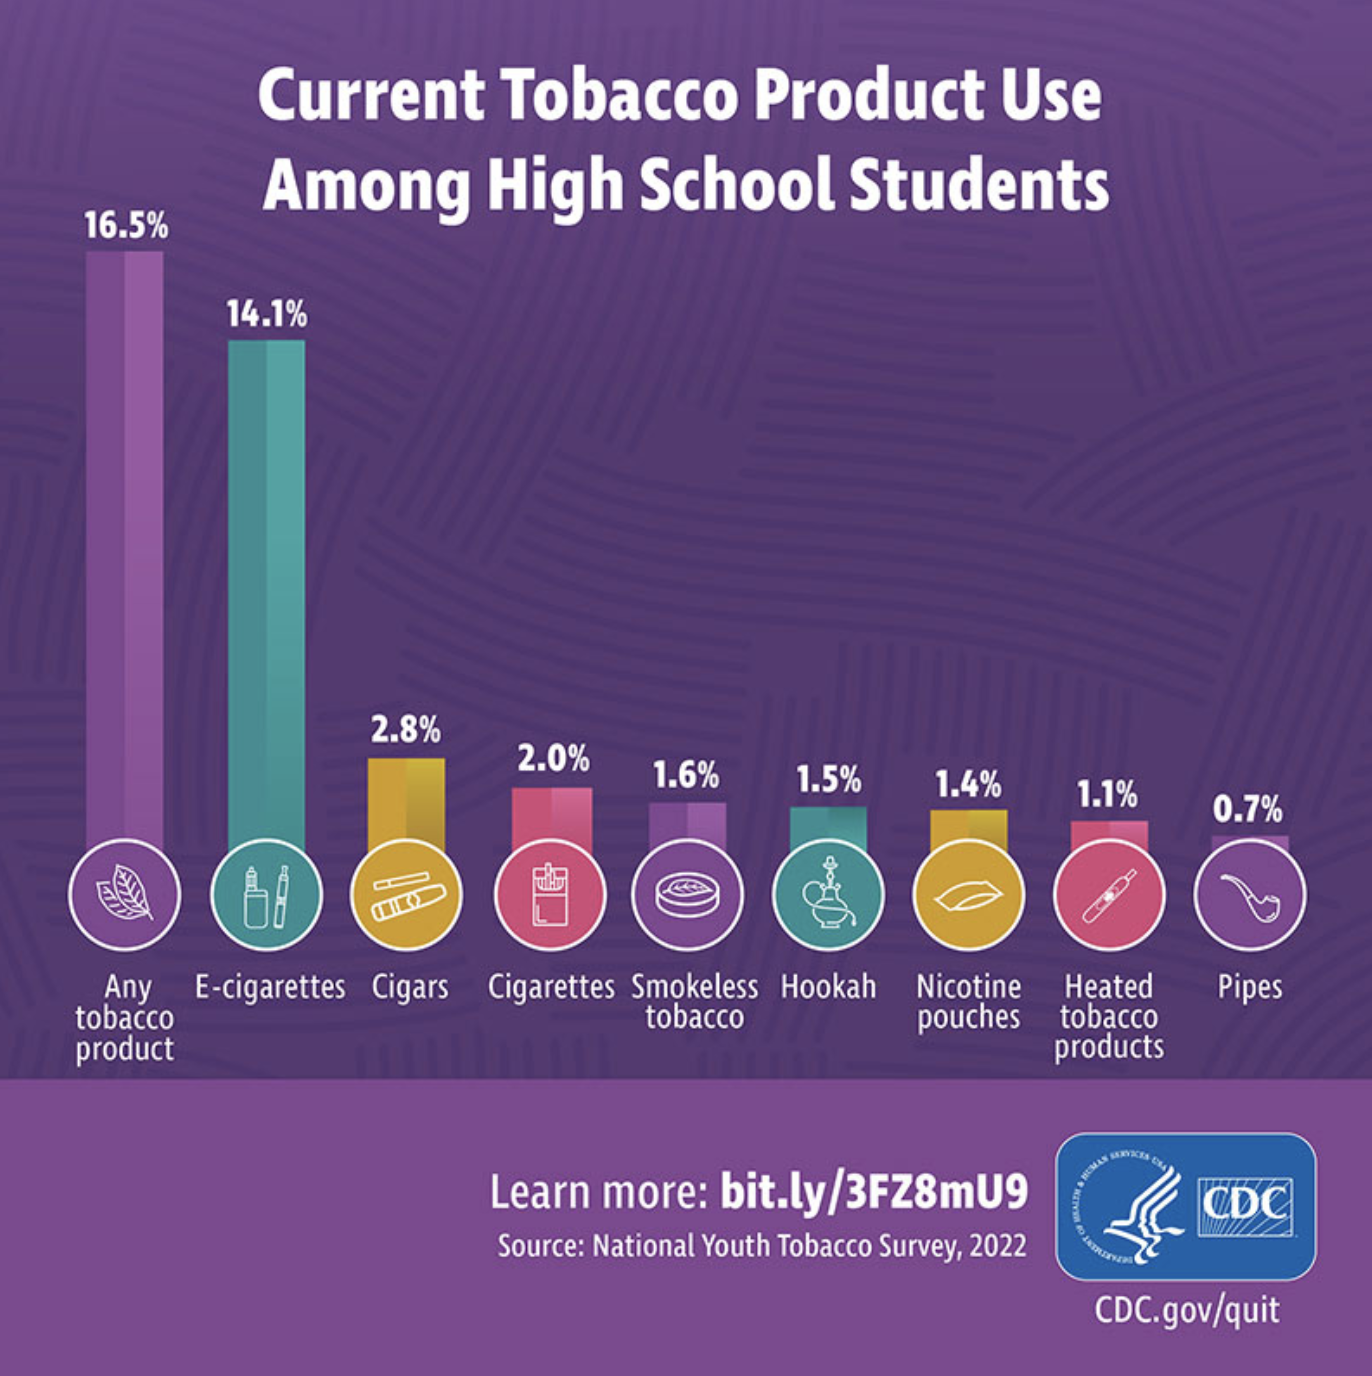 Current Tobacco Product Use Among High School Students Image